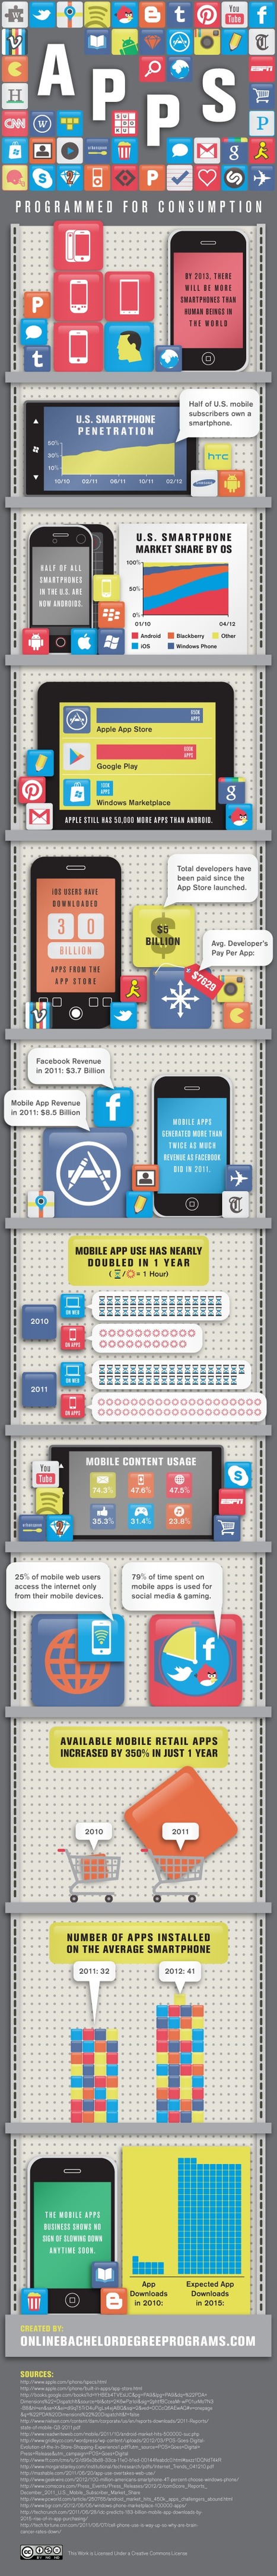 Mobile Web is Not COMING It’s HERE Just In Case You Haven’t Noticed [Infographic] | MarketingHits | Scoop.it